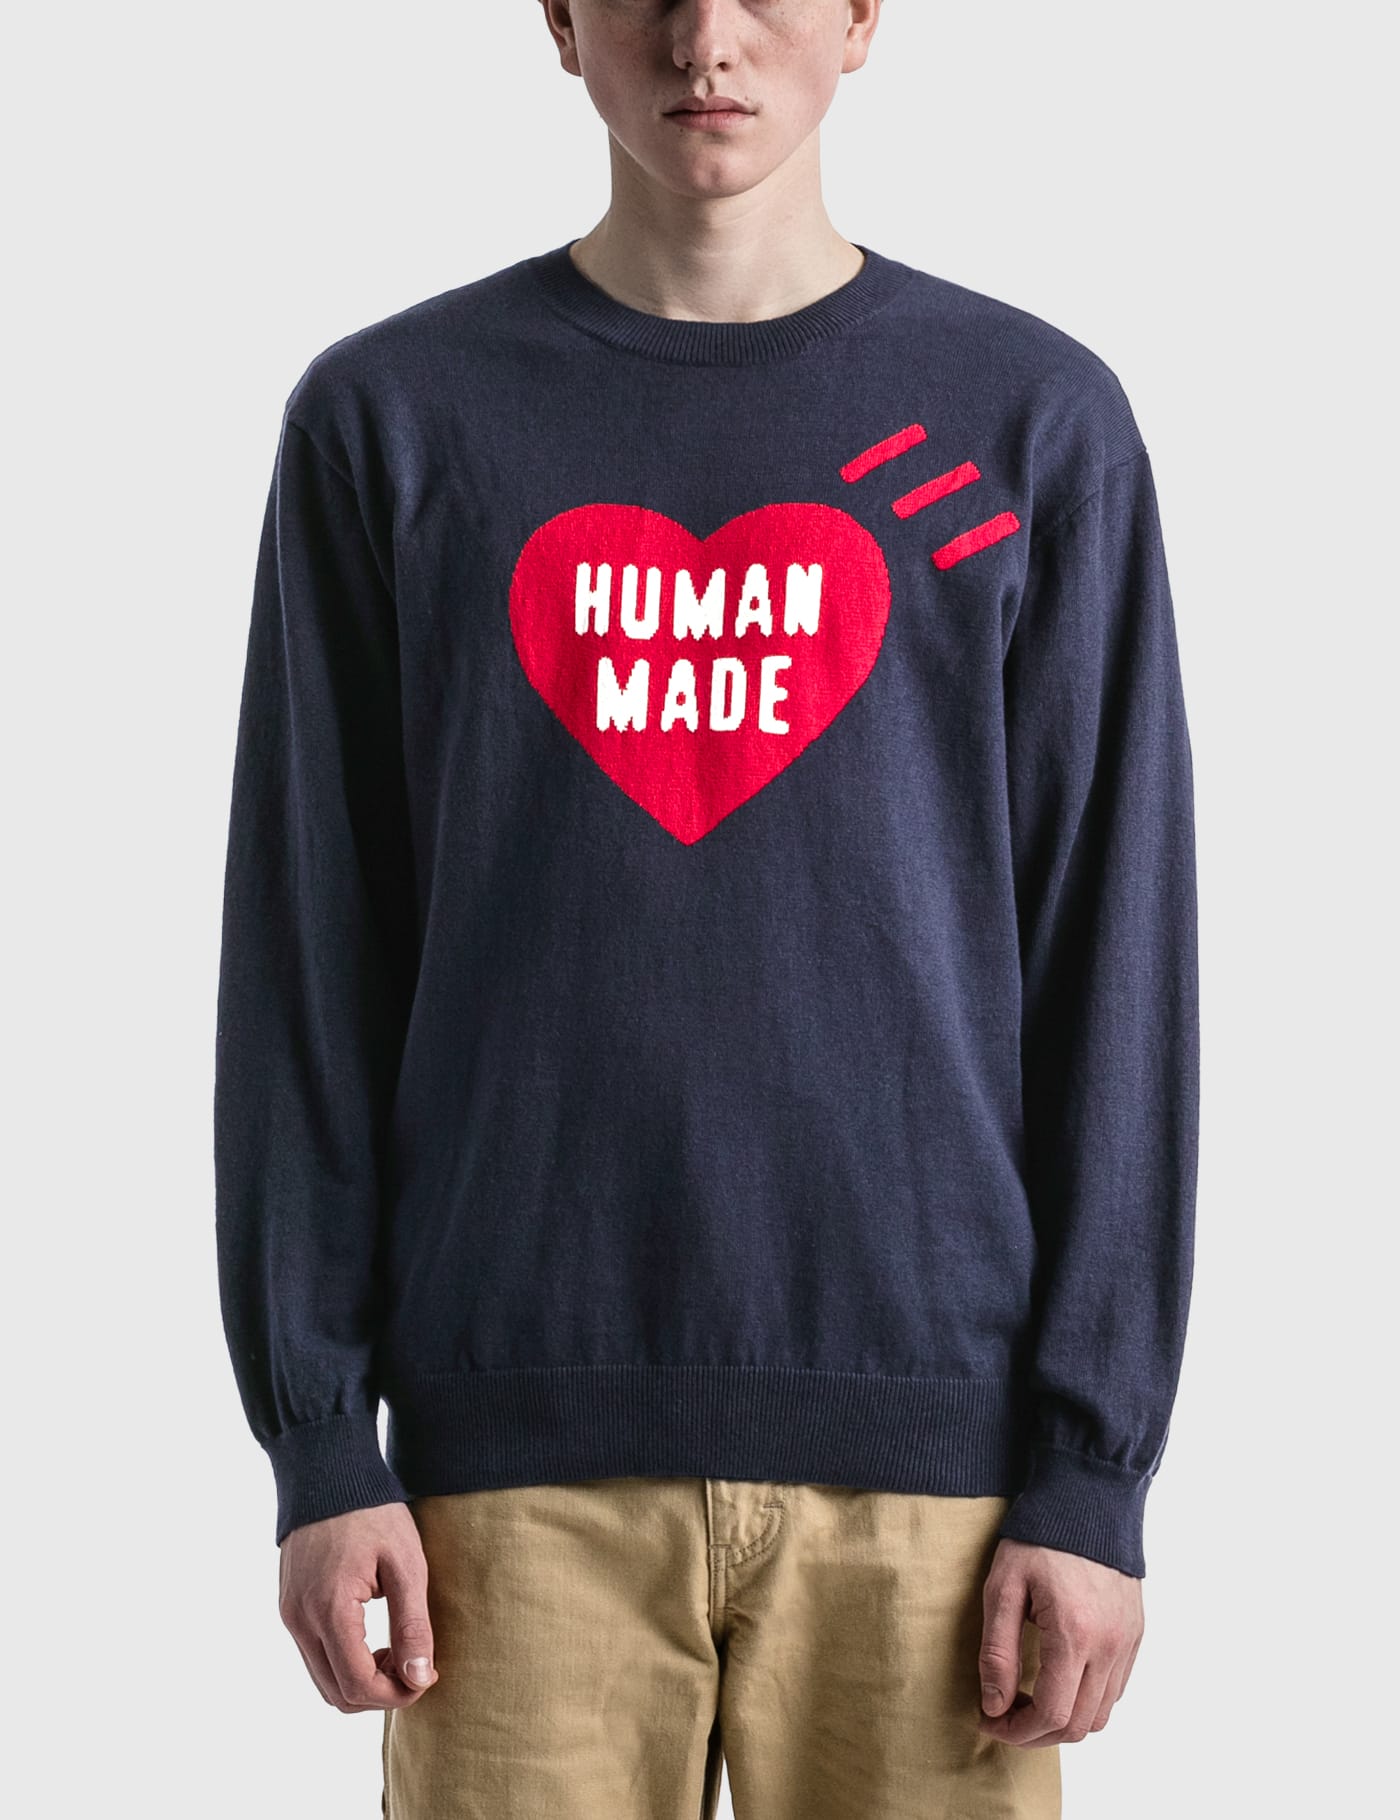 Human Made - Heart Knit Sweater | HBX - Globally Curated Fashion